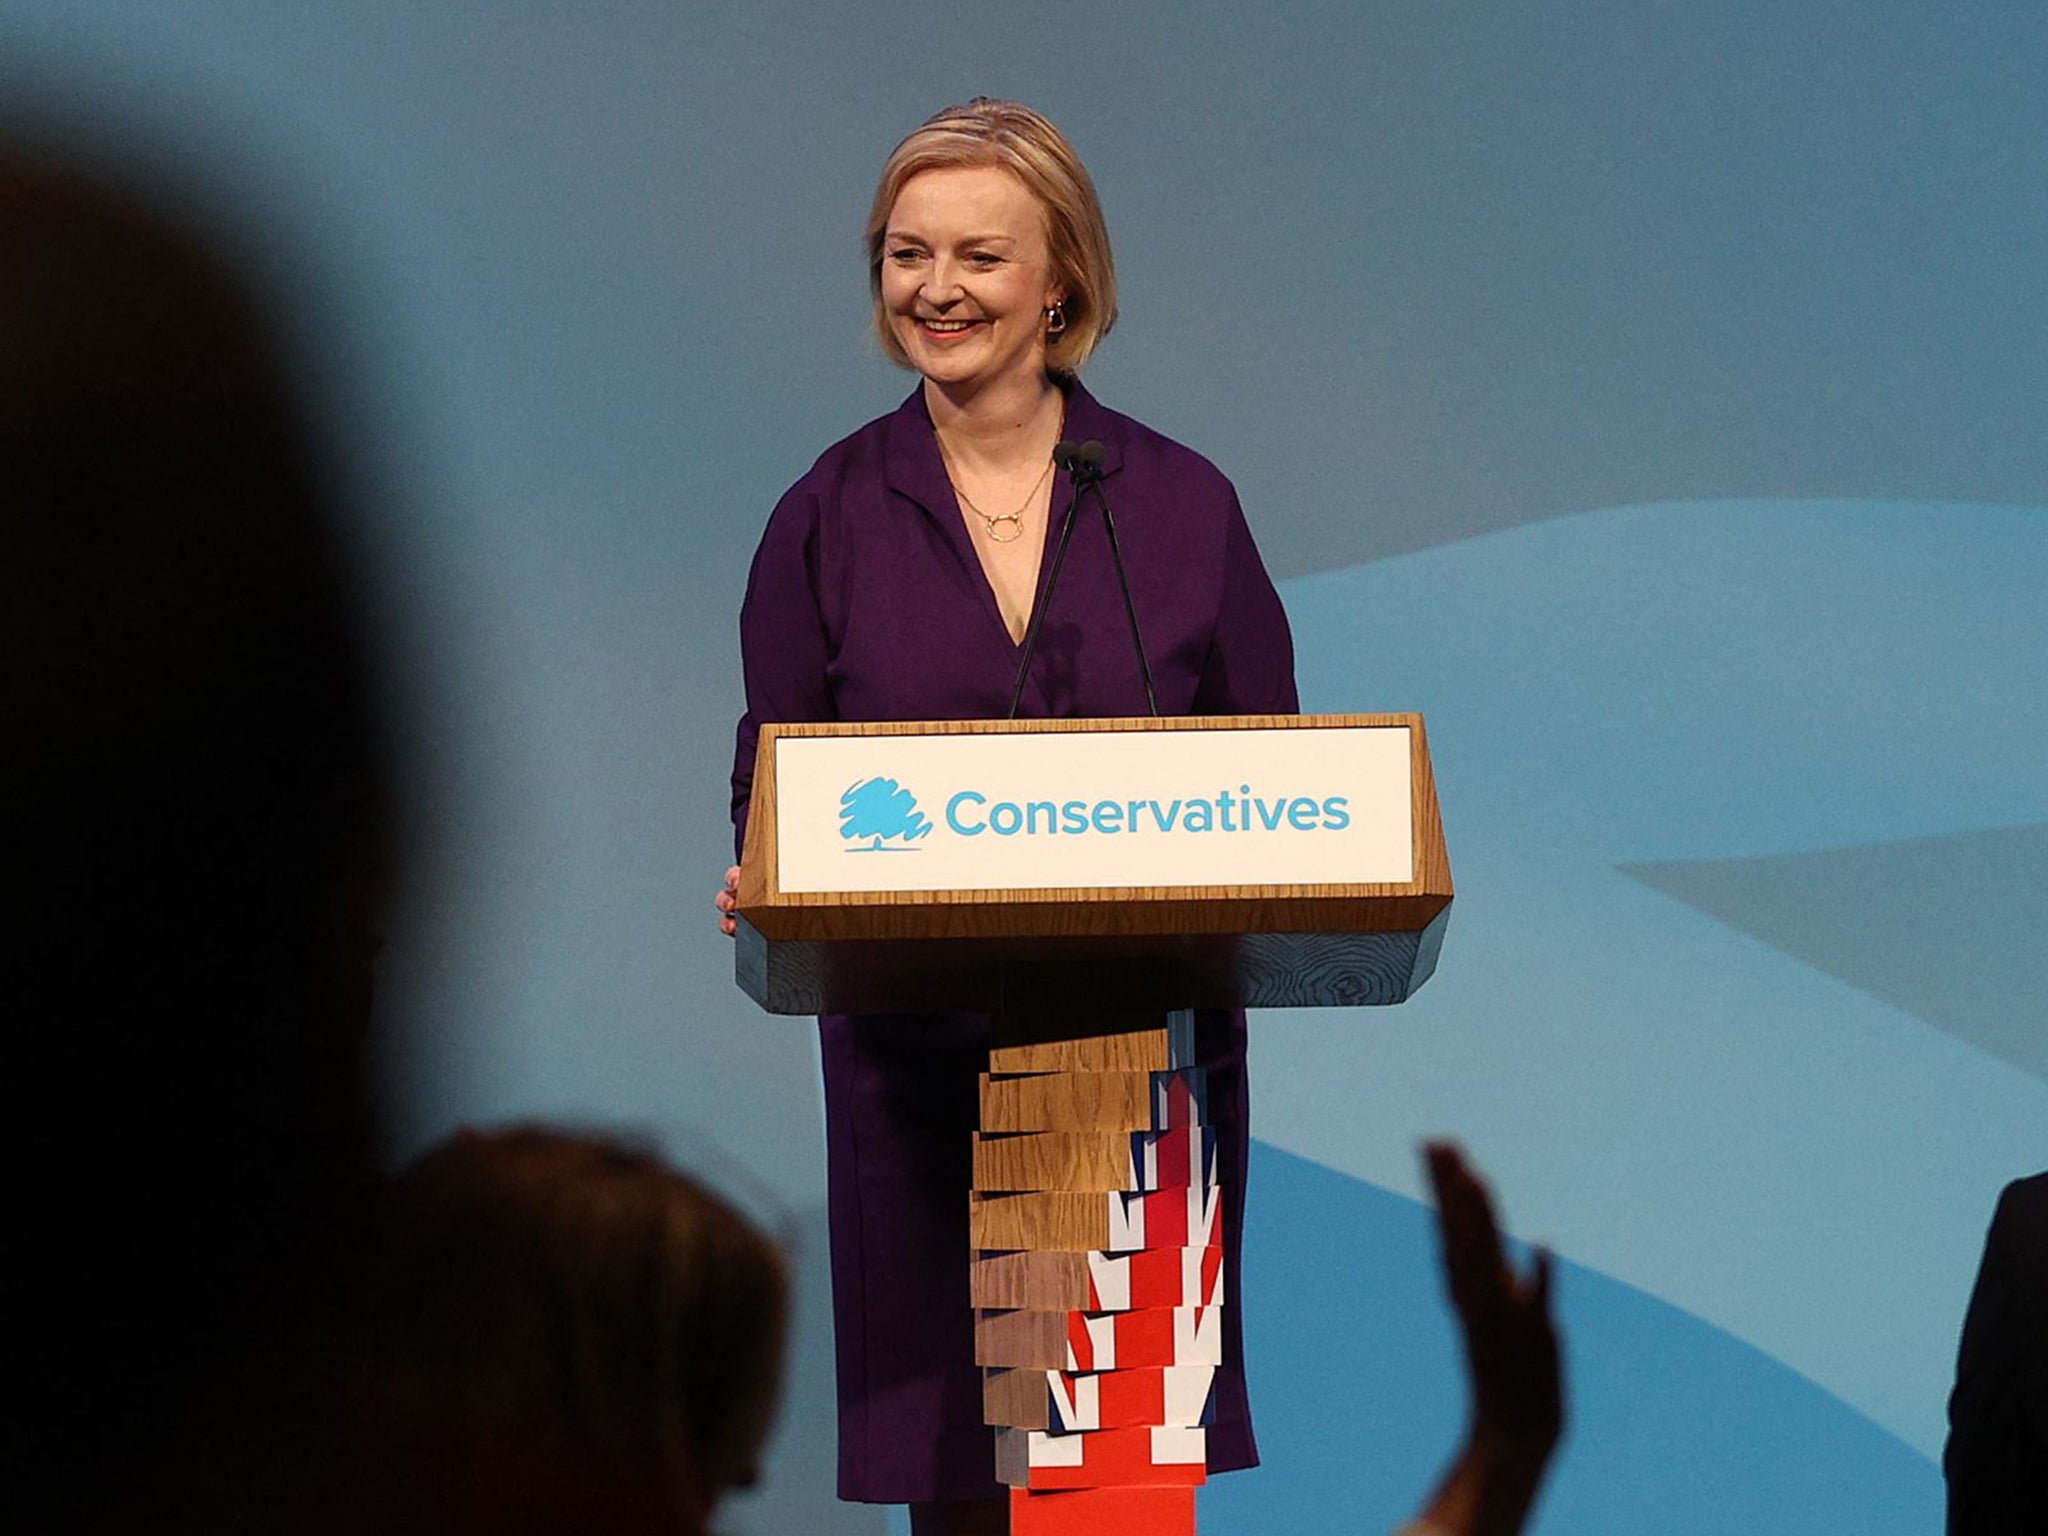 Lizz Truss was announced as the new leader of the Conservative party on Monday.